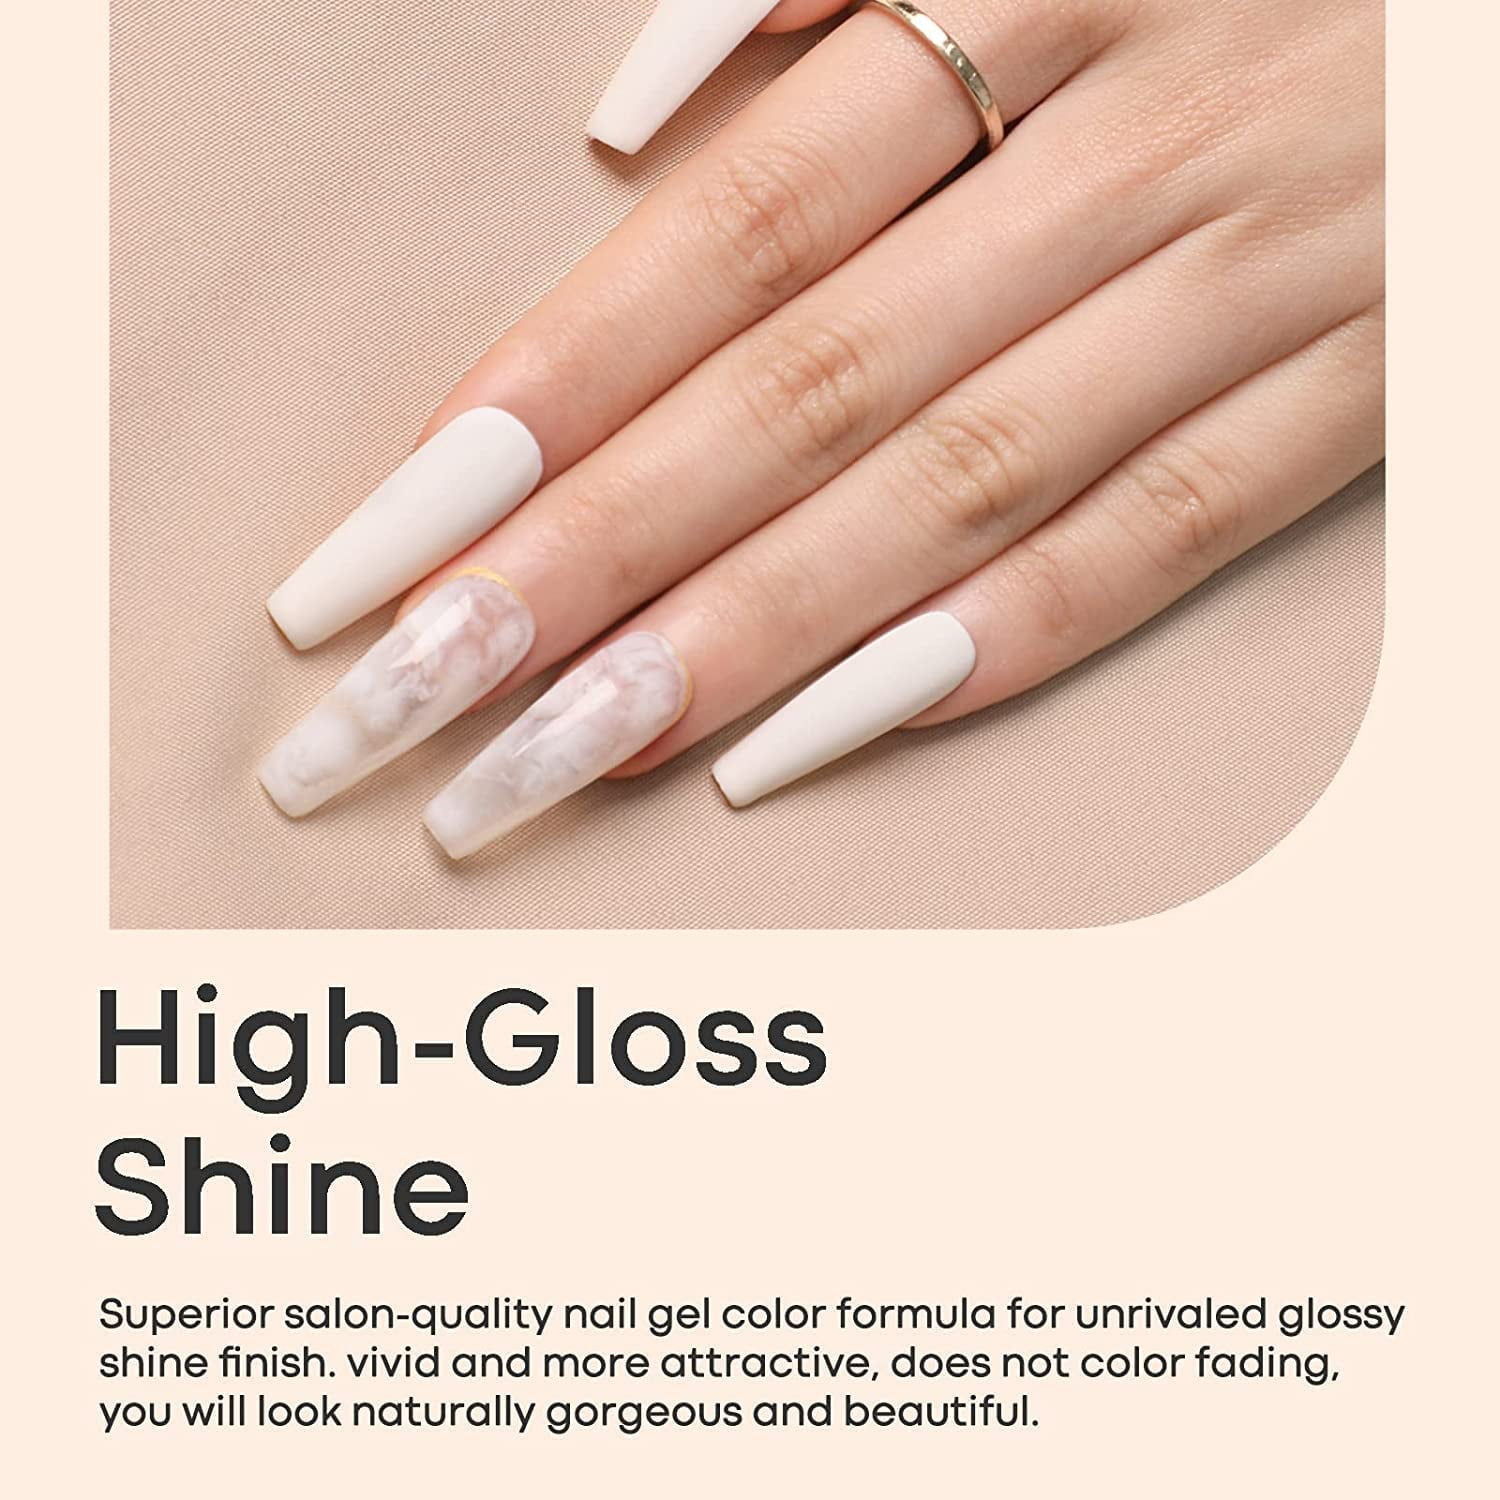 25 Neutral Nail Art Designs to Try in 2022 — Anna Elizabeth | Beige nails,  Simple nails, Gel nails